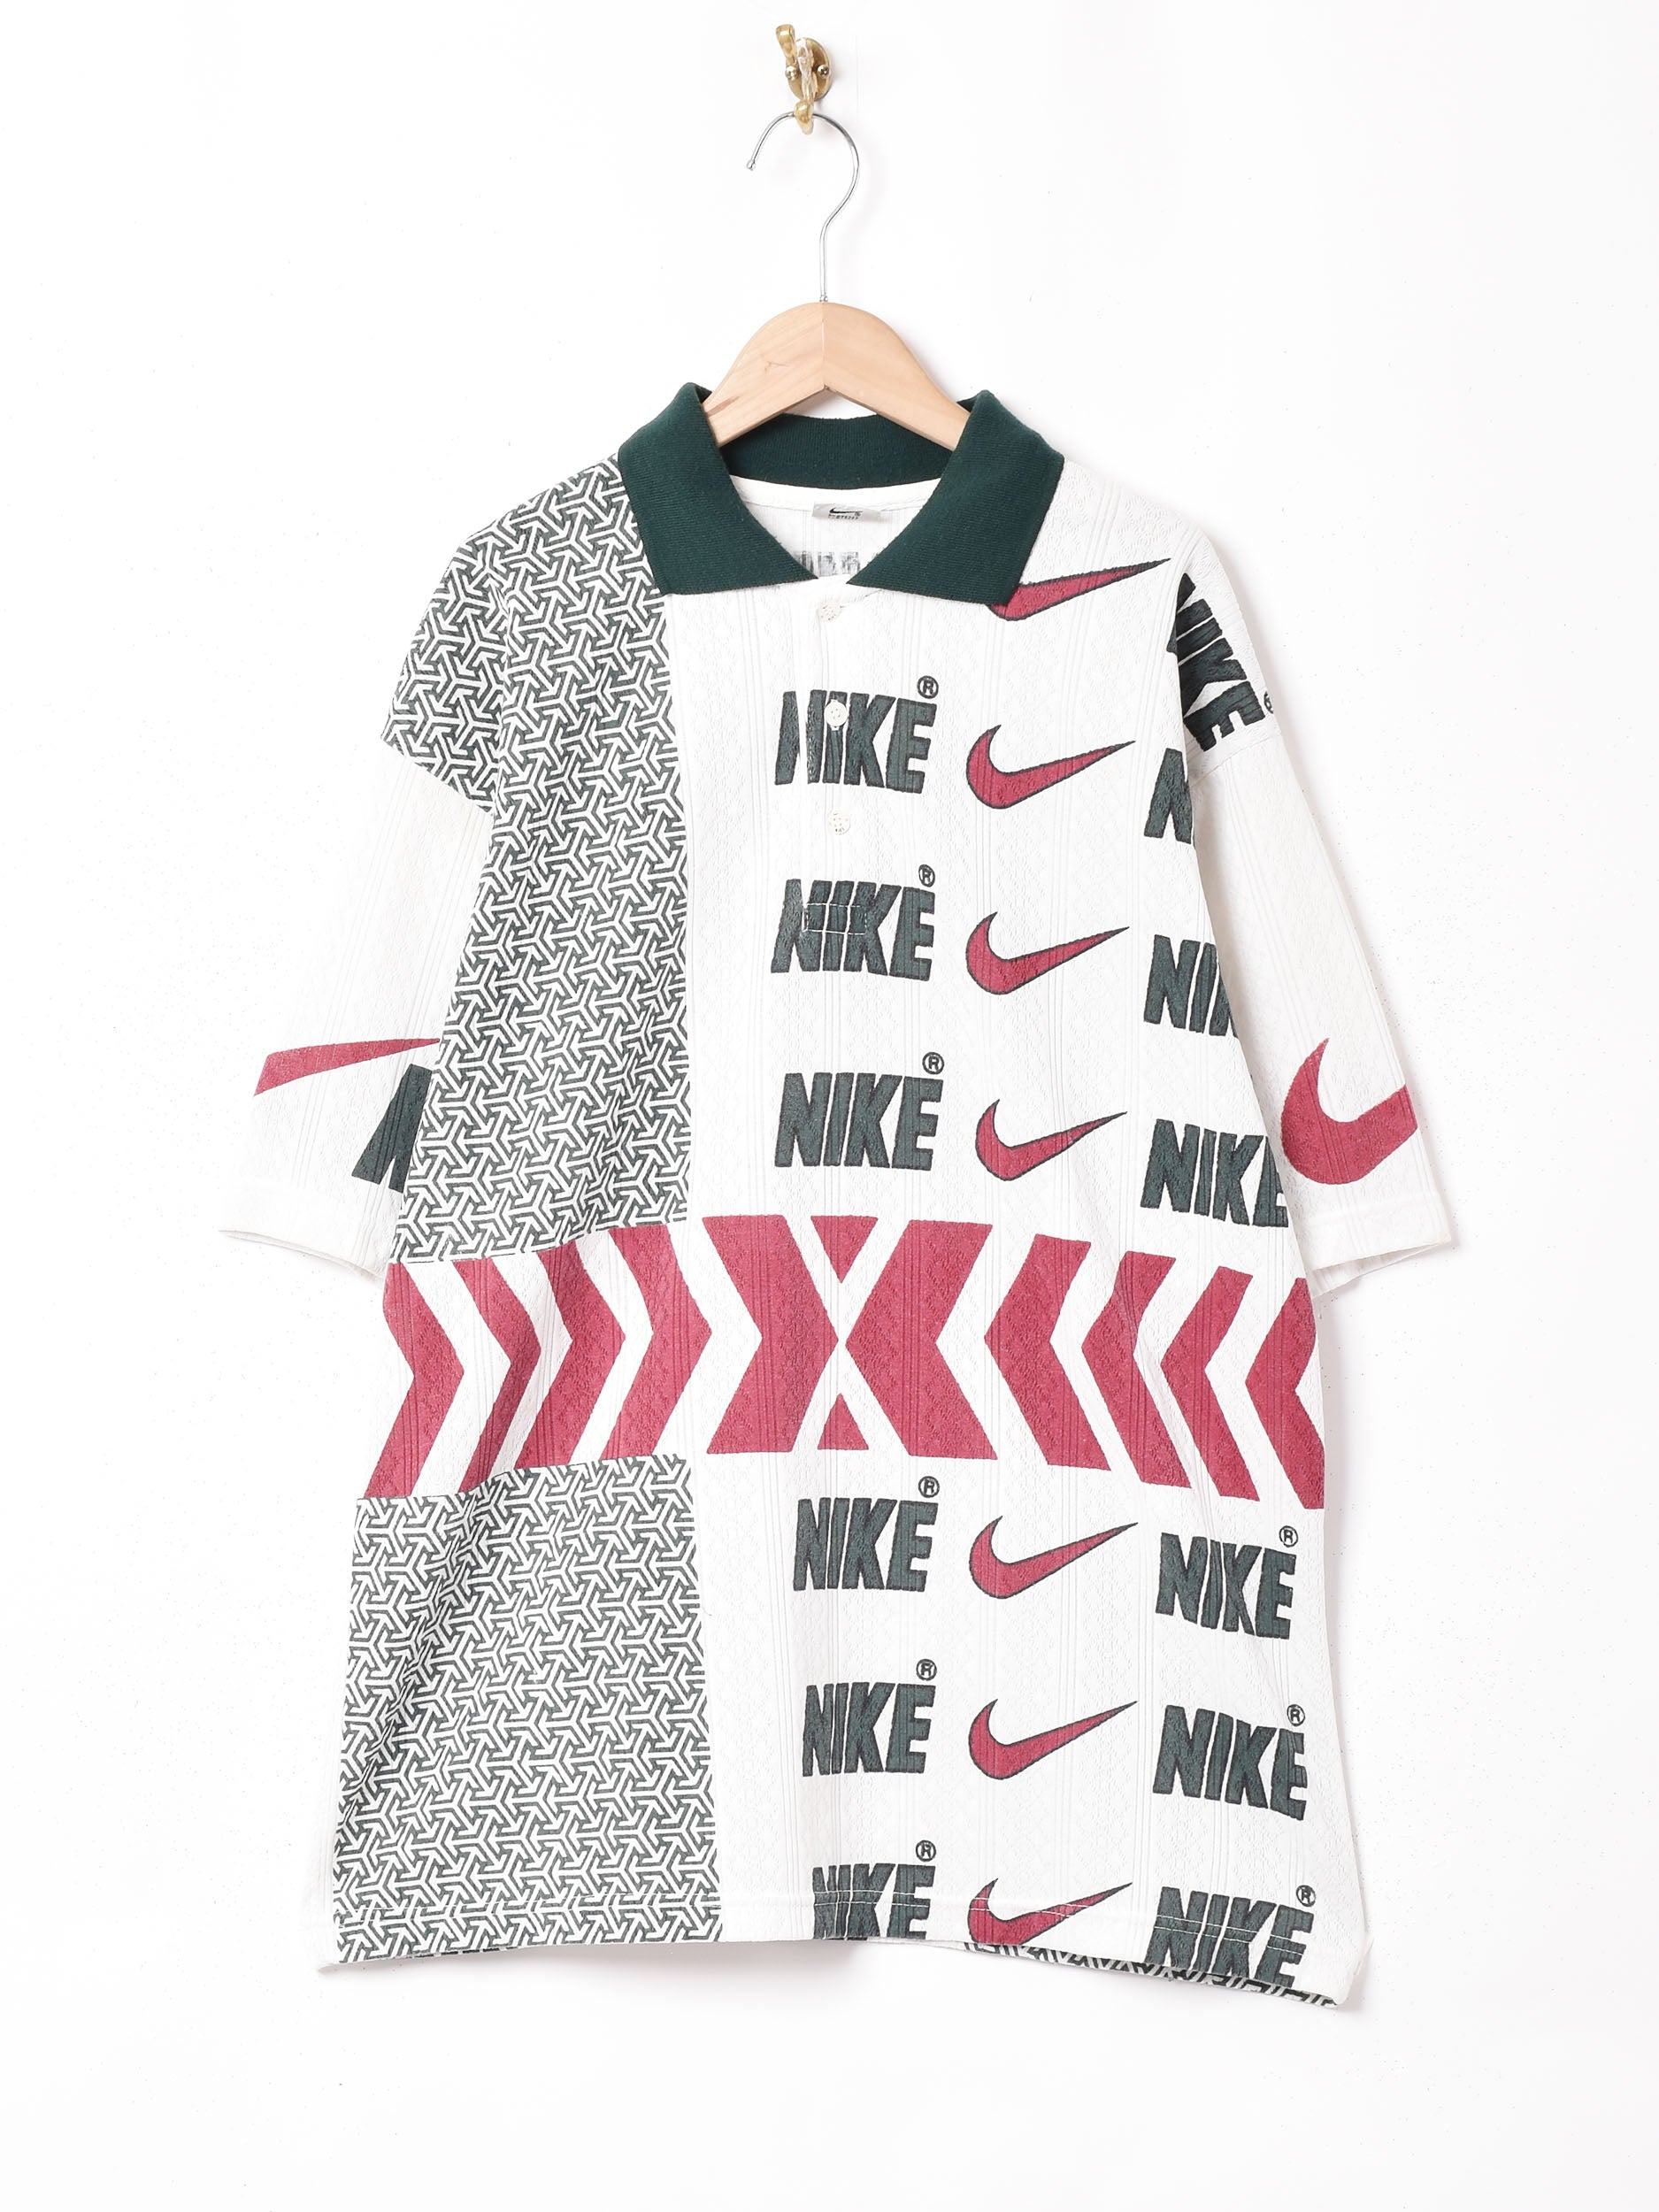 NIKE 総柄 ポロシャツ